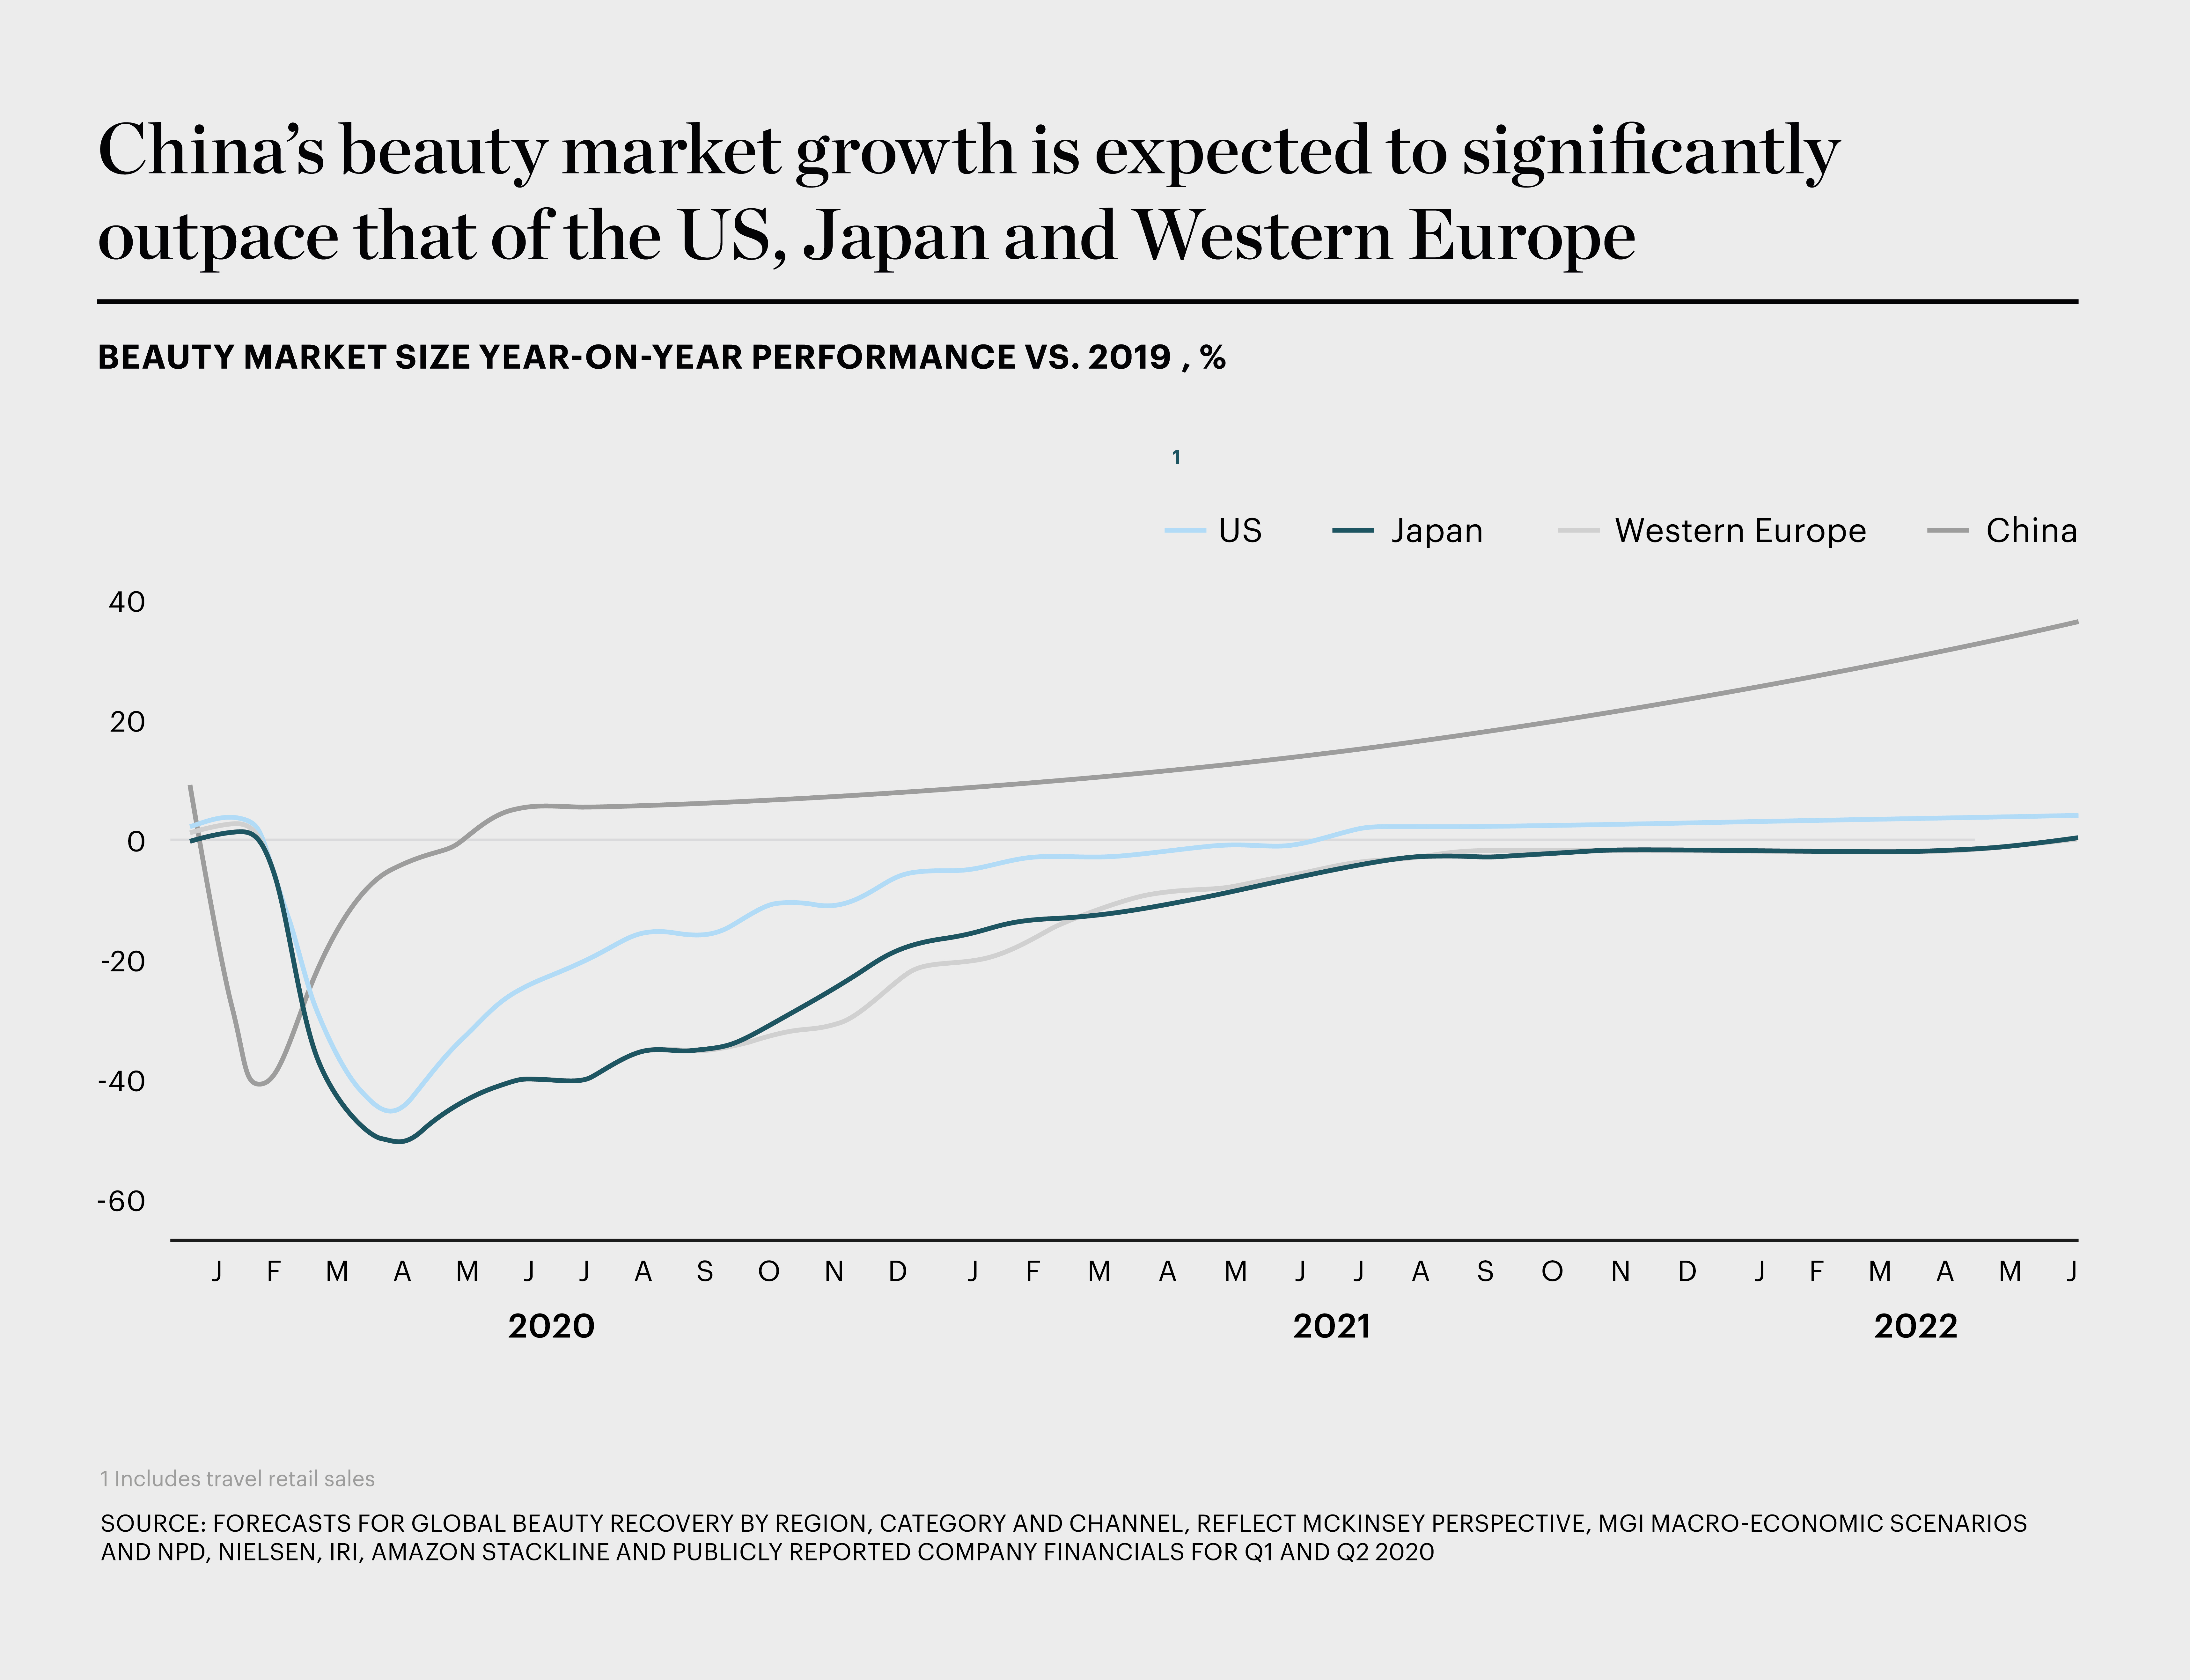 LVMH Cosmetics and Perfume Sales Outpace the Market